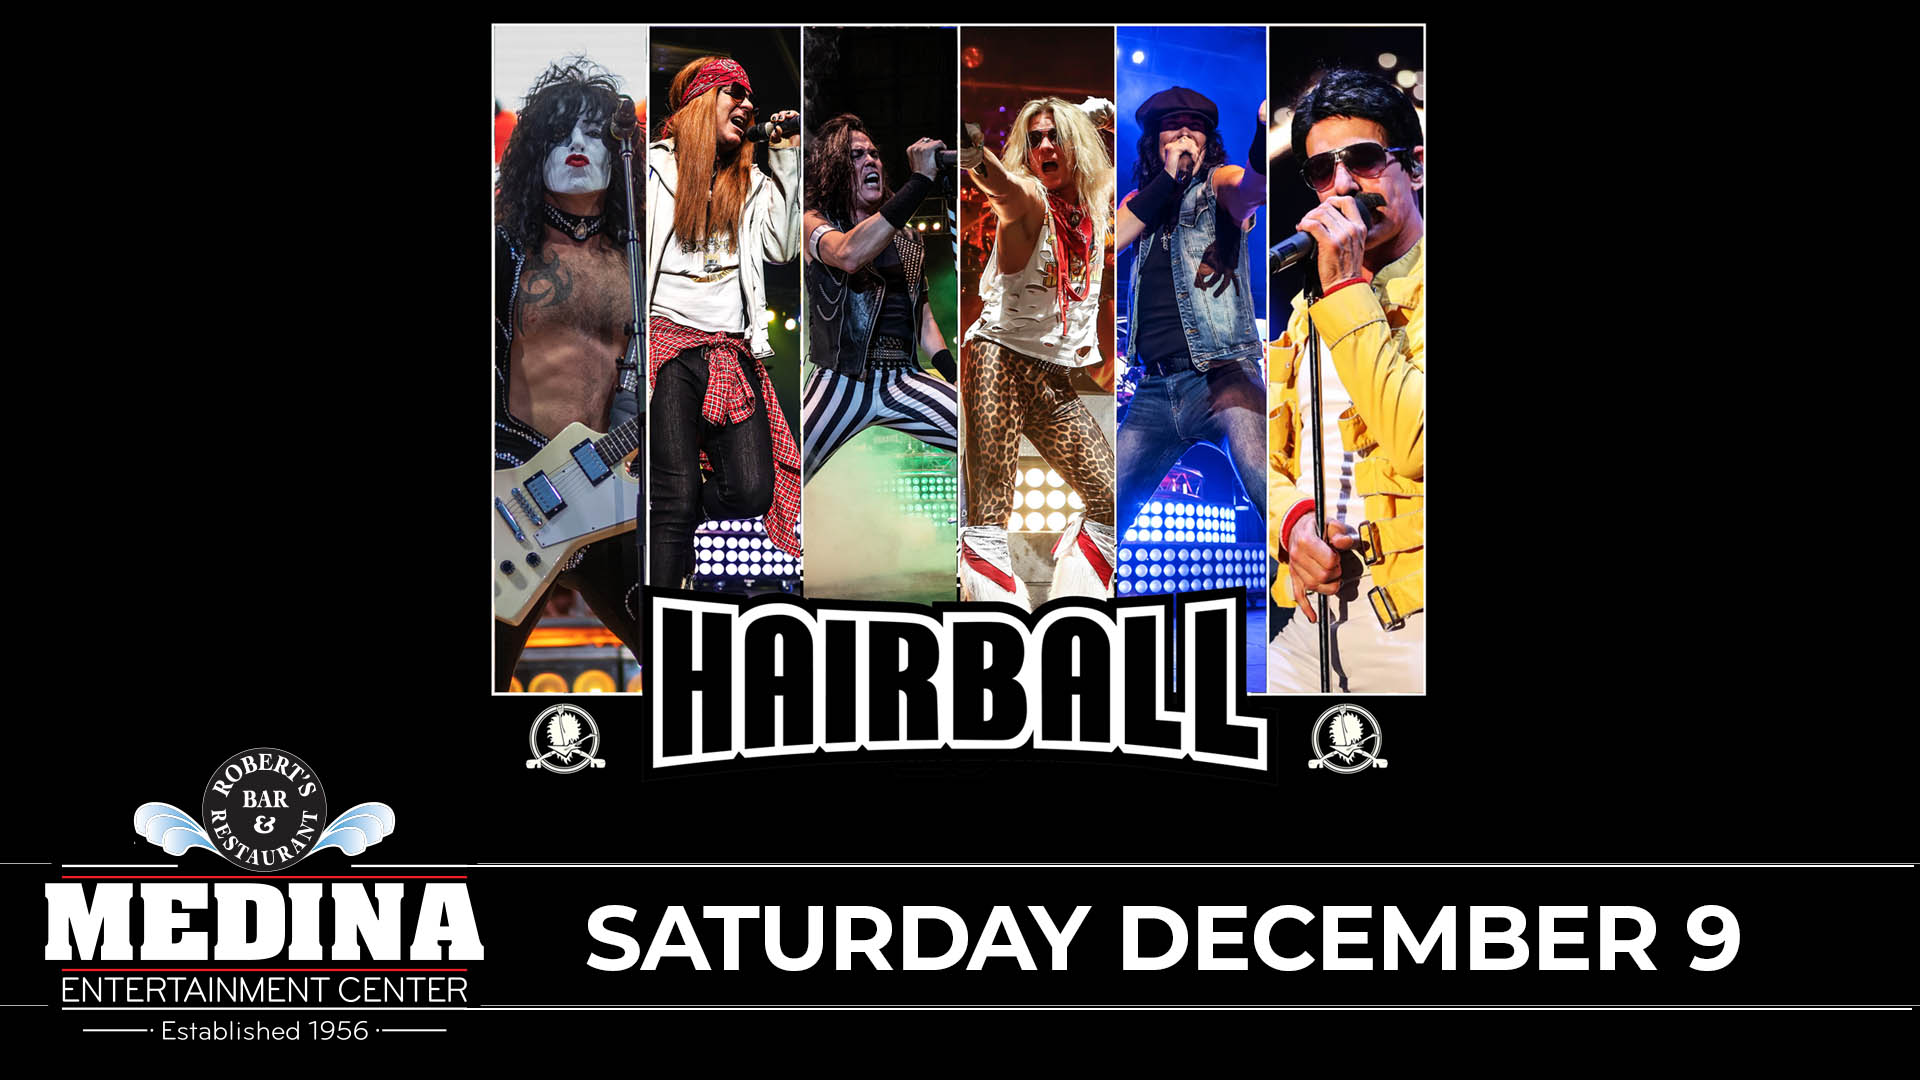 HAIRBALL with Guest TBA Medina Entertainment Center Saturday, December 9, 2023 Doors: 7:30PM | Music: 8:15PM | 21+ Tickets on-sale Friday, July 21st at 11AM General Admission: $28 ADVANCE / $33 DAY OF SHOW